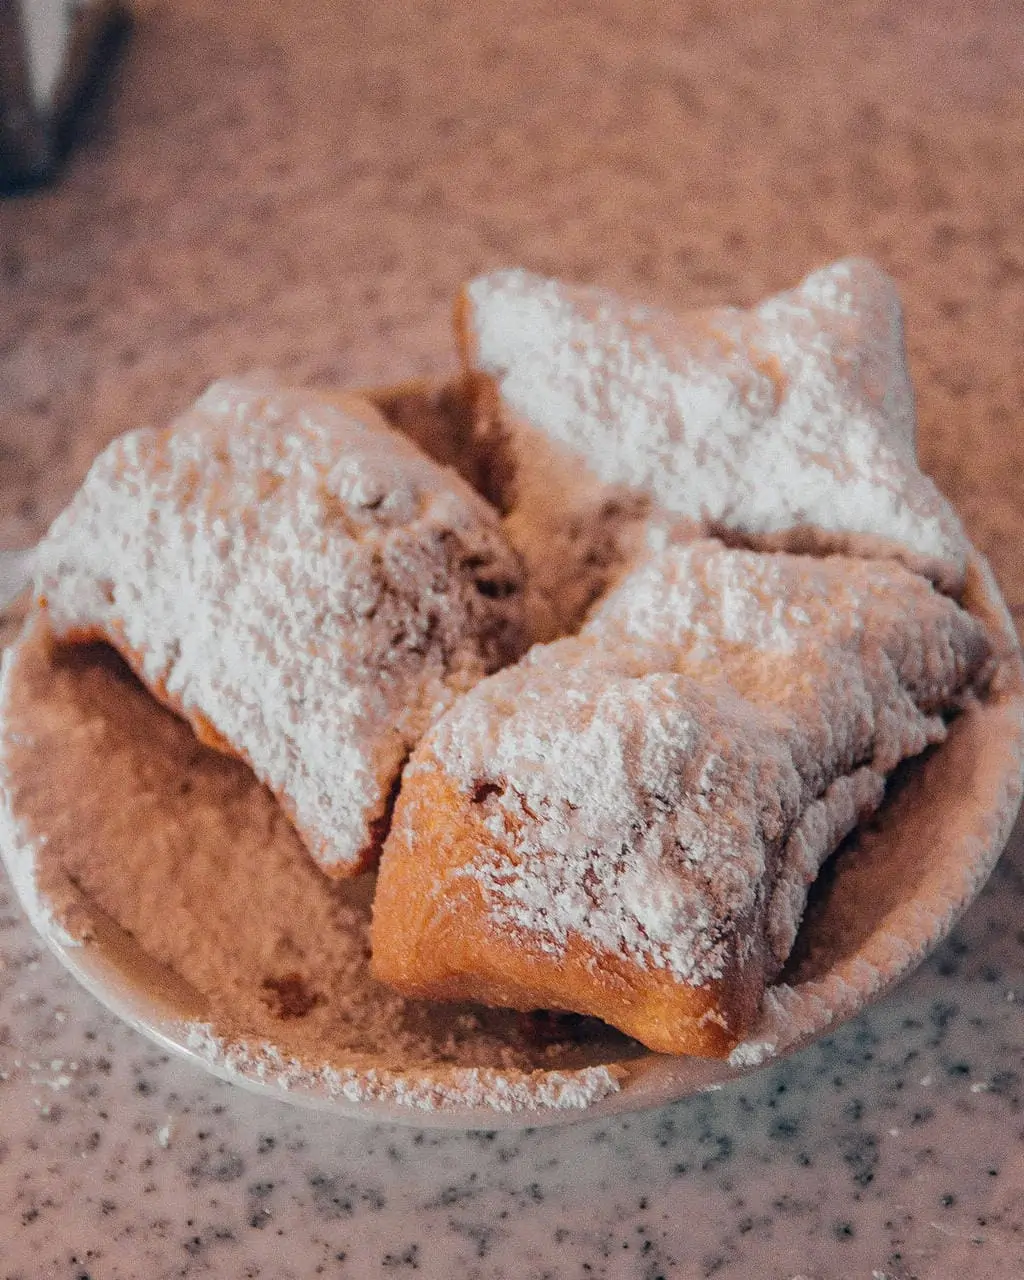 Beignets at Cafe du Monde in New Orleans Louisiana - a must eat food in New Orleans